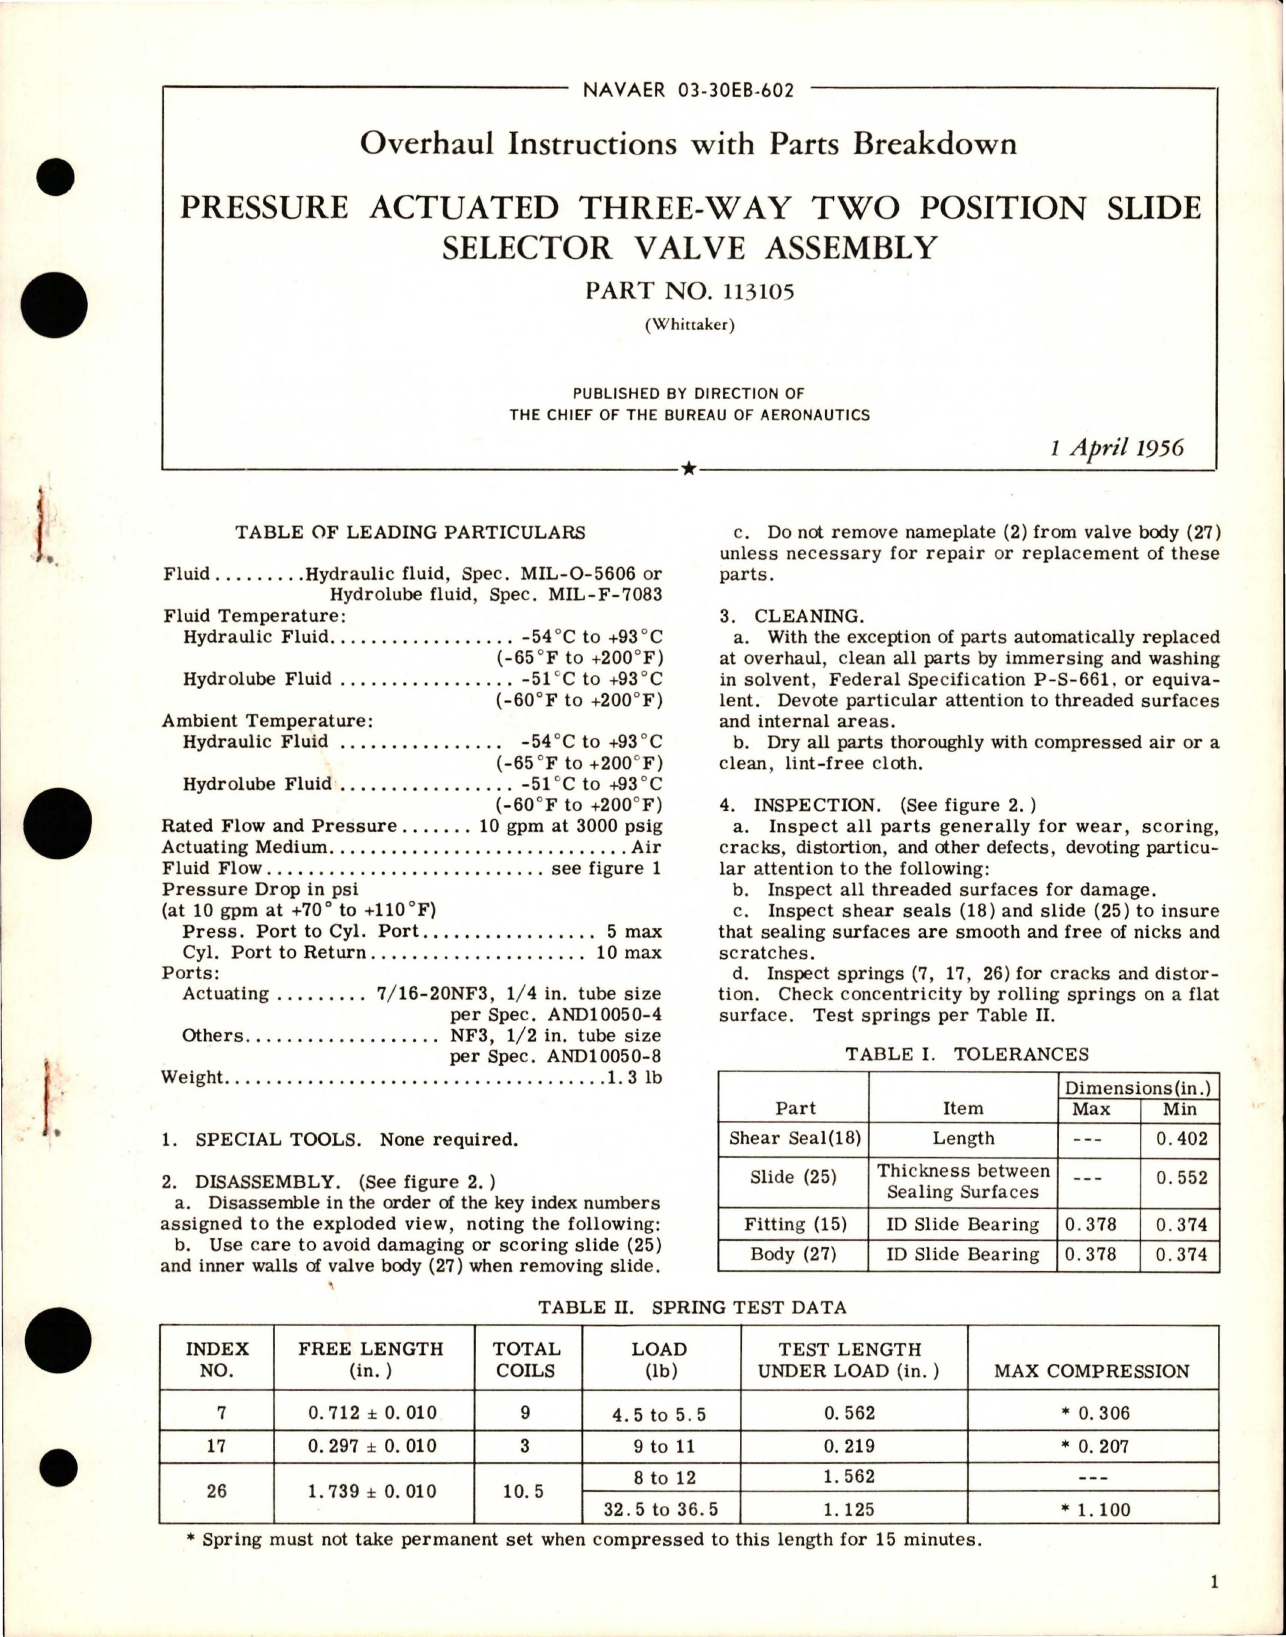 Sample page 1 from AirCorps Library document: Overhaul Instructions with Parts Breakdown for Pressure Actuated Three-Way Two Position Slide Selector Valve Assembly - Part 113105